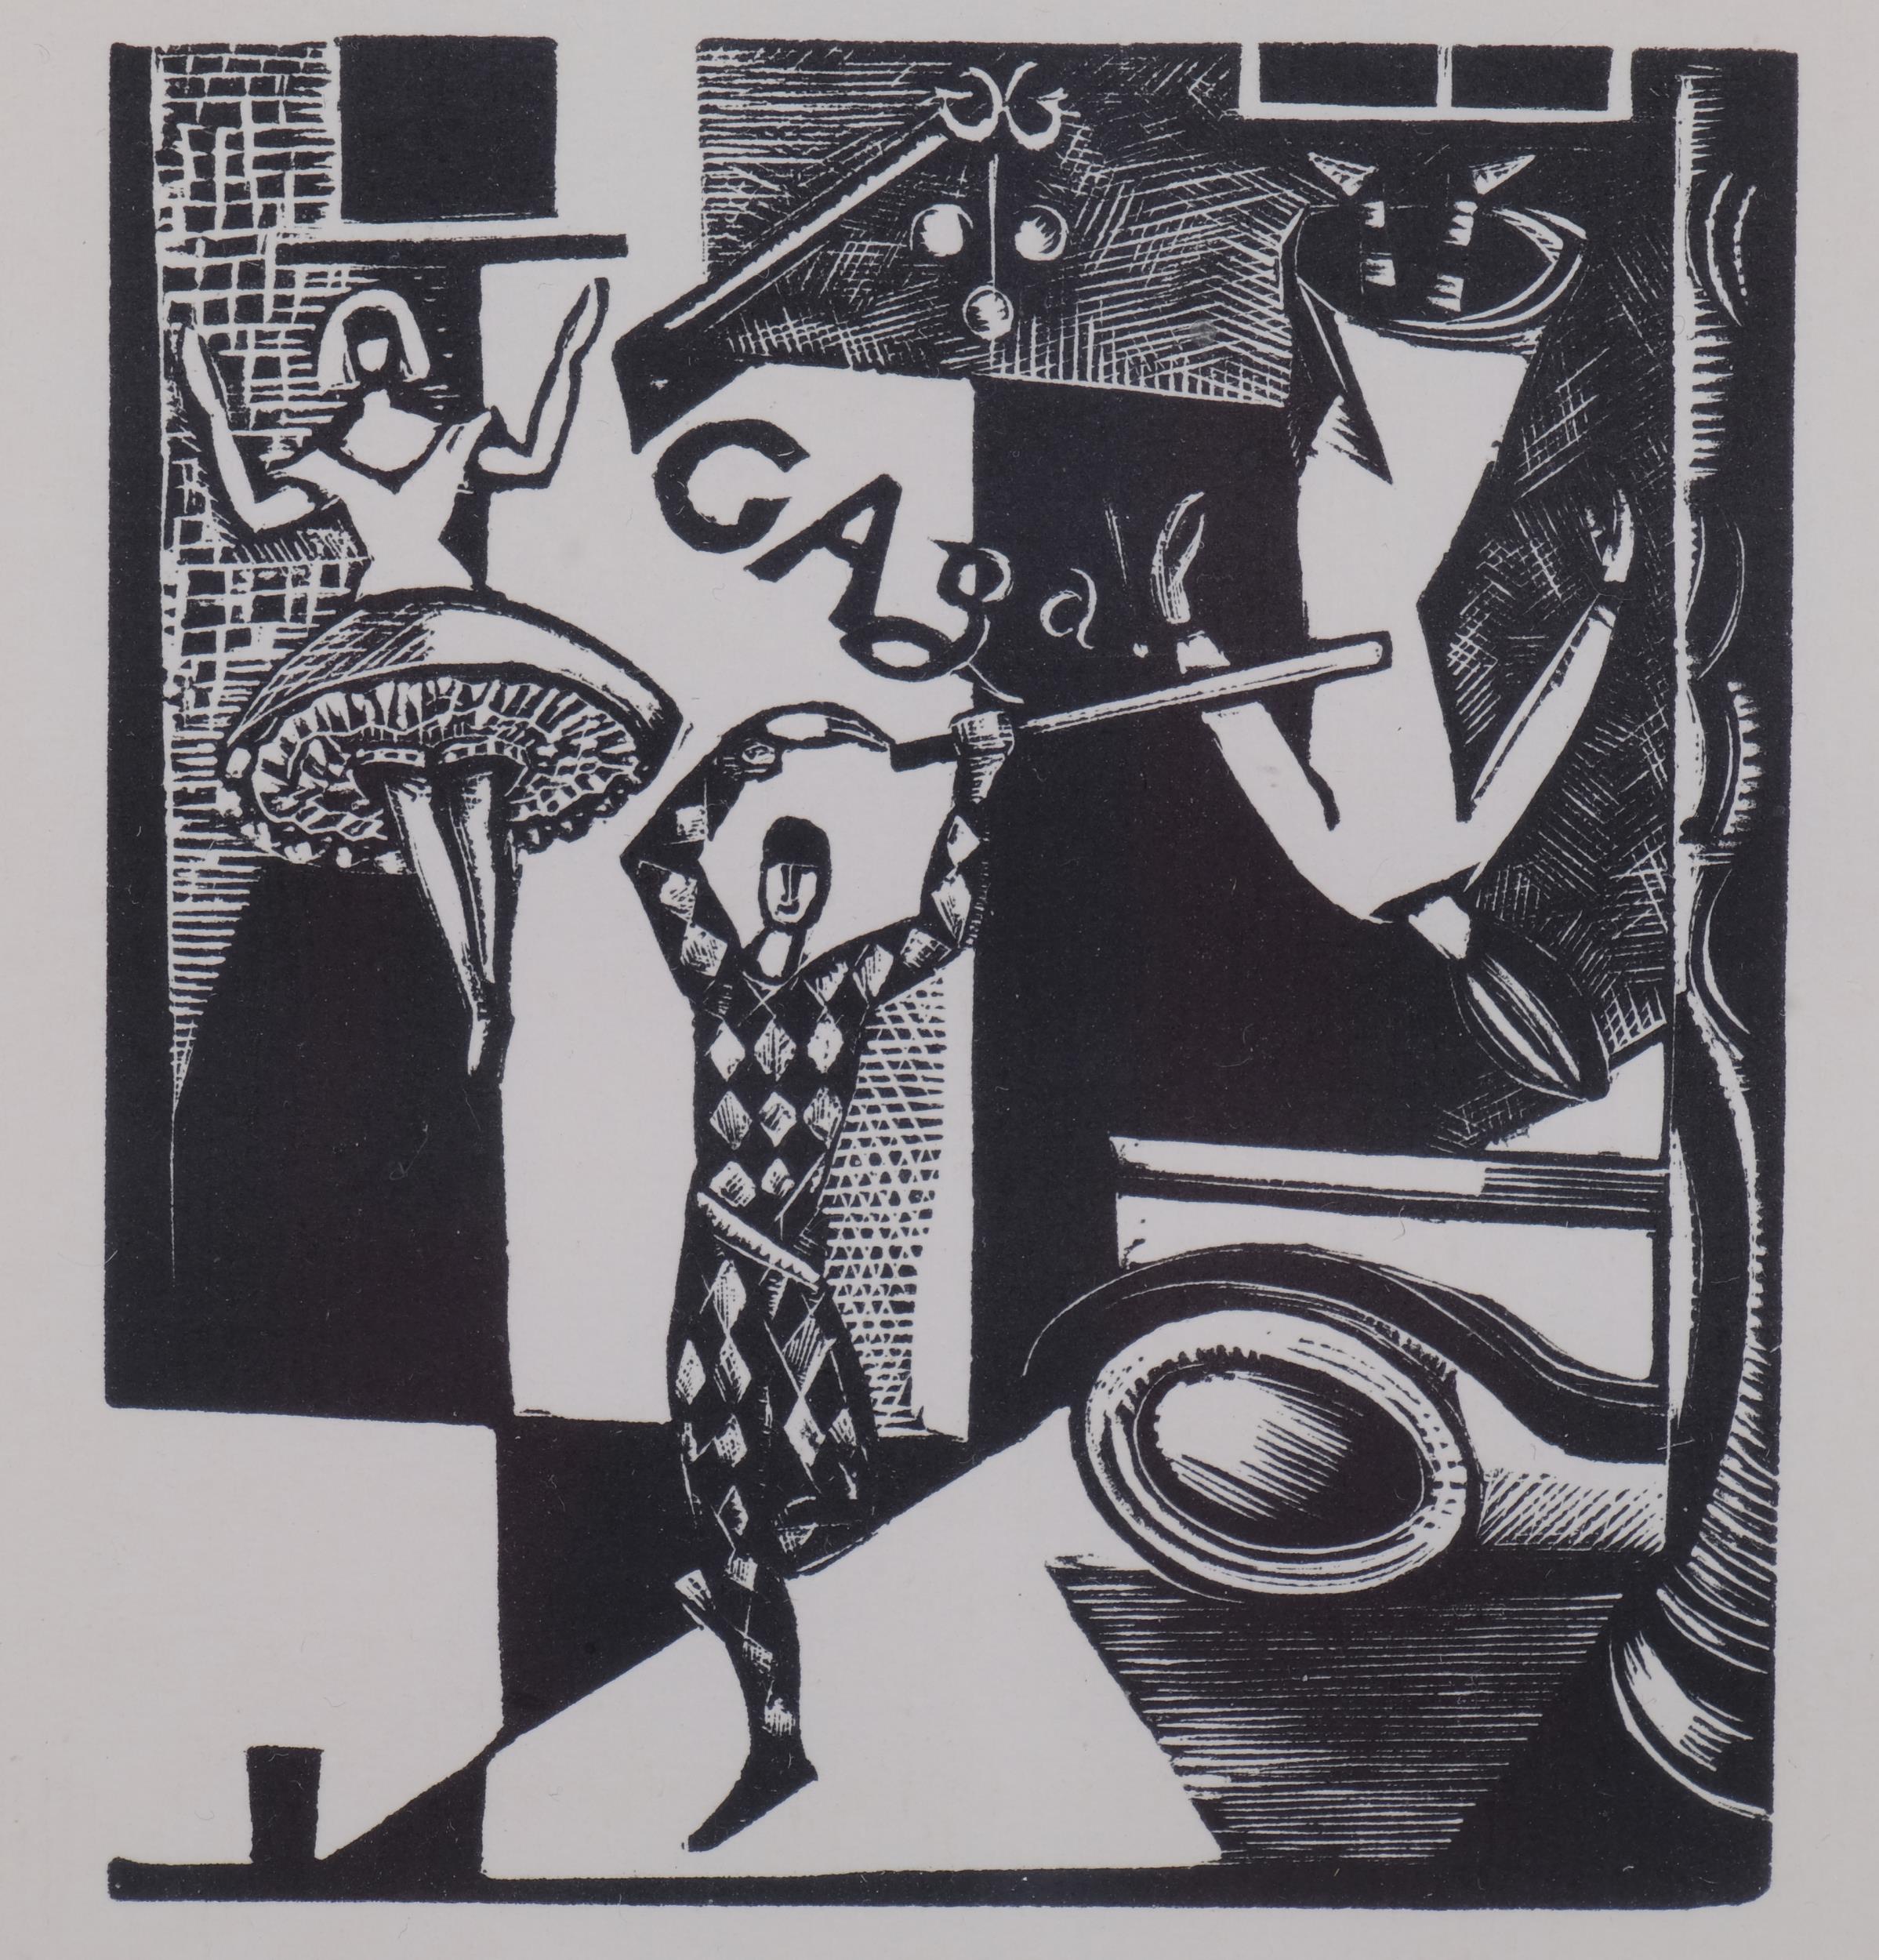 Paul Nash, Gaga, woodcut print 1923, from an edition of 1000 copies, postan ref. 36, image 11cm x - Image 3 of 4